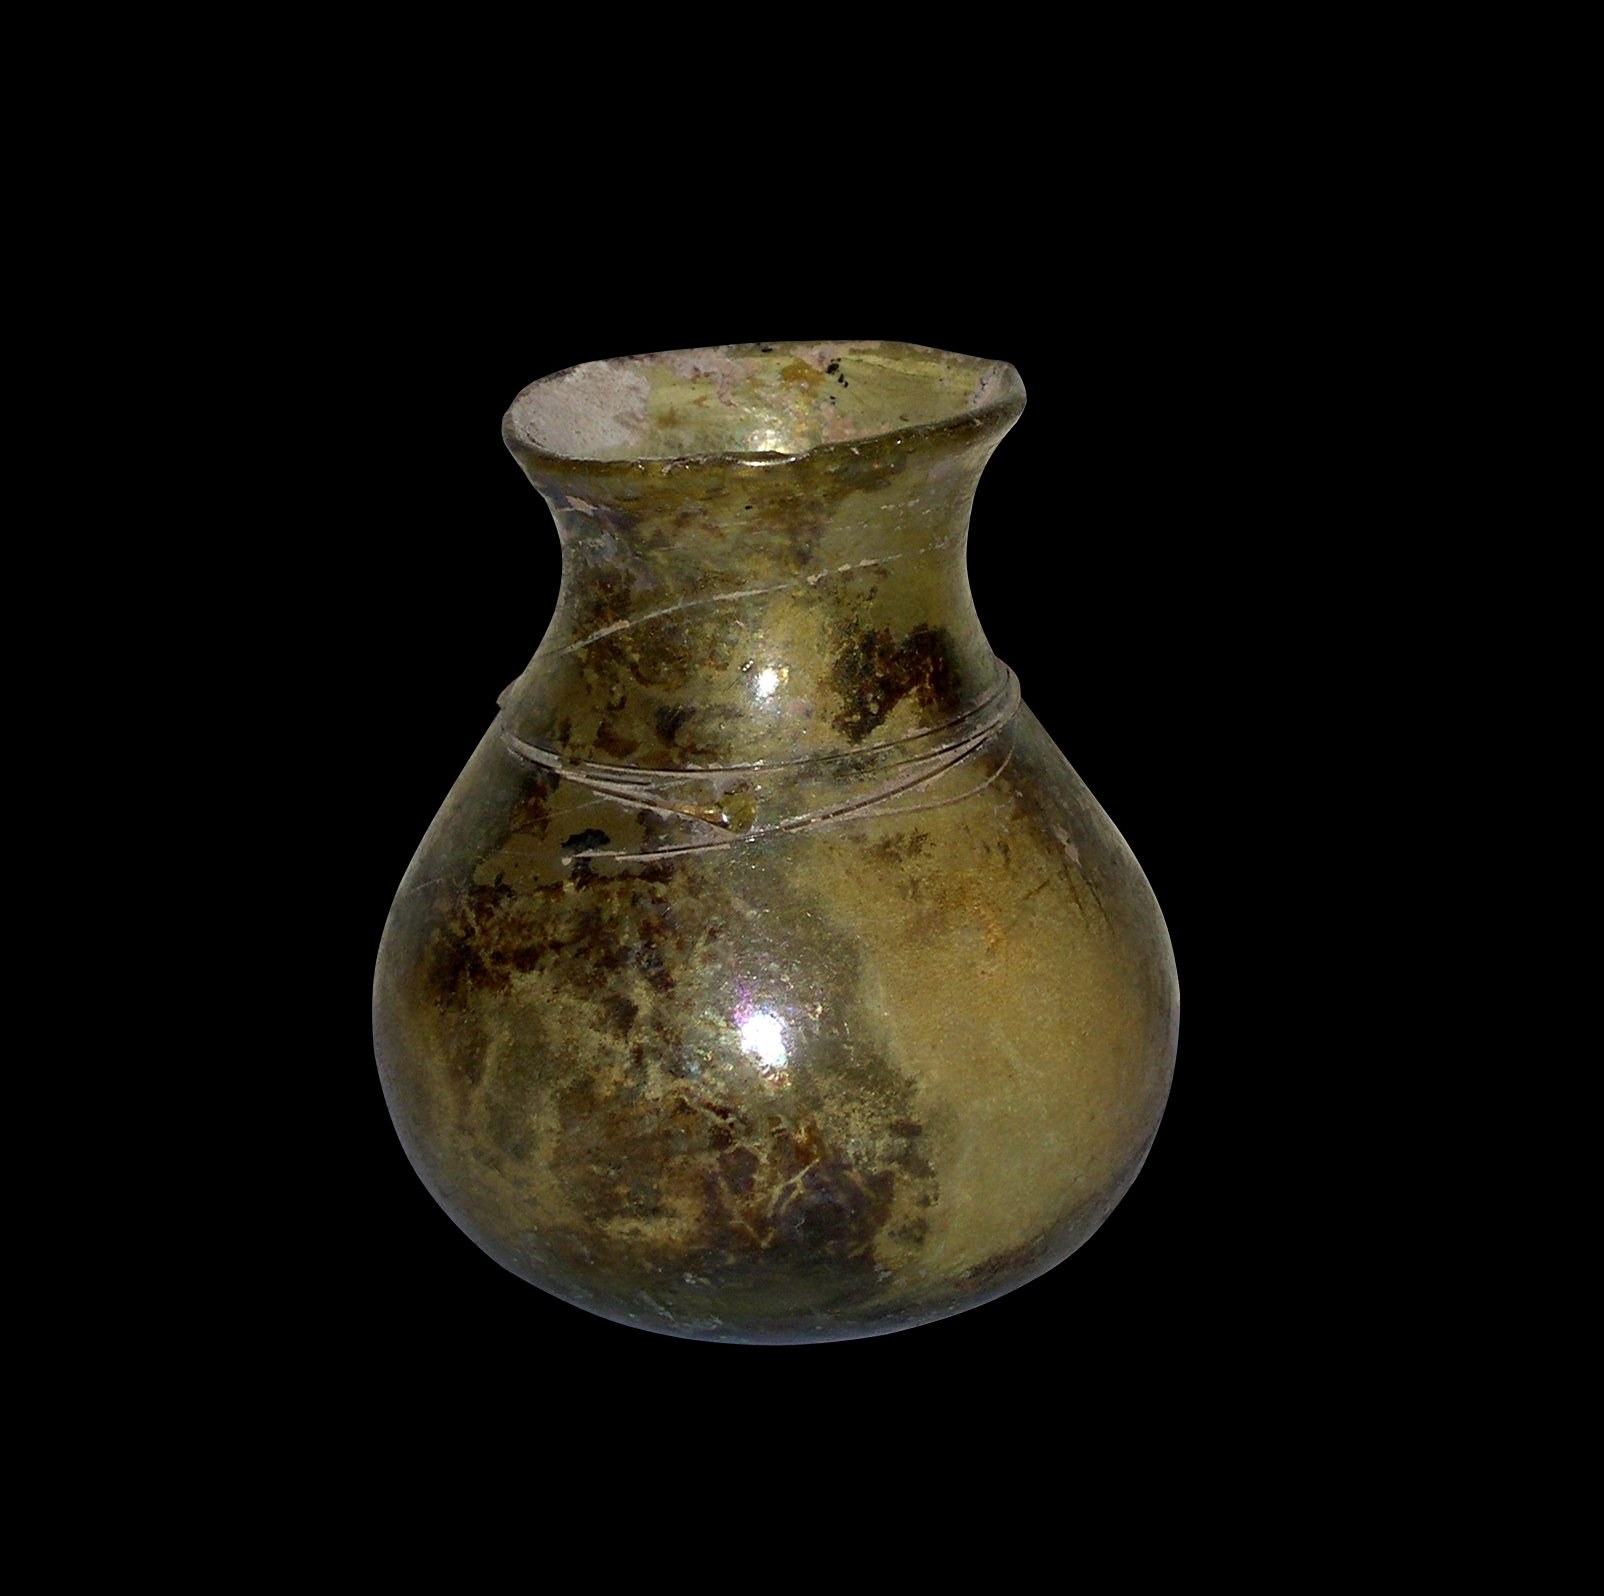 Opera di Toilet bottle with a pear-shaped body (Ampolla)